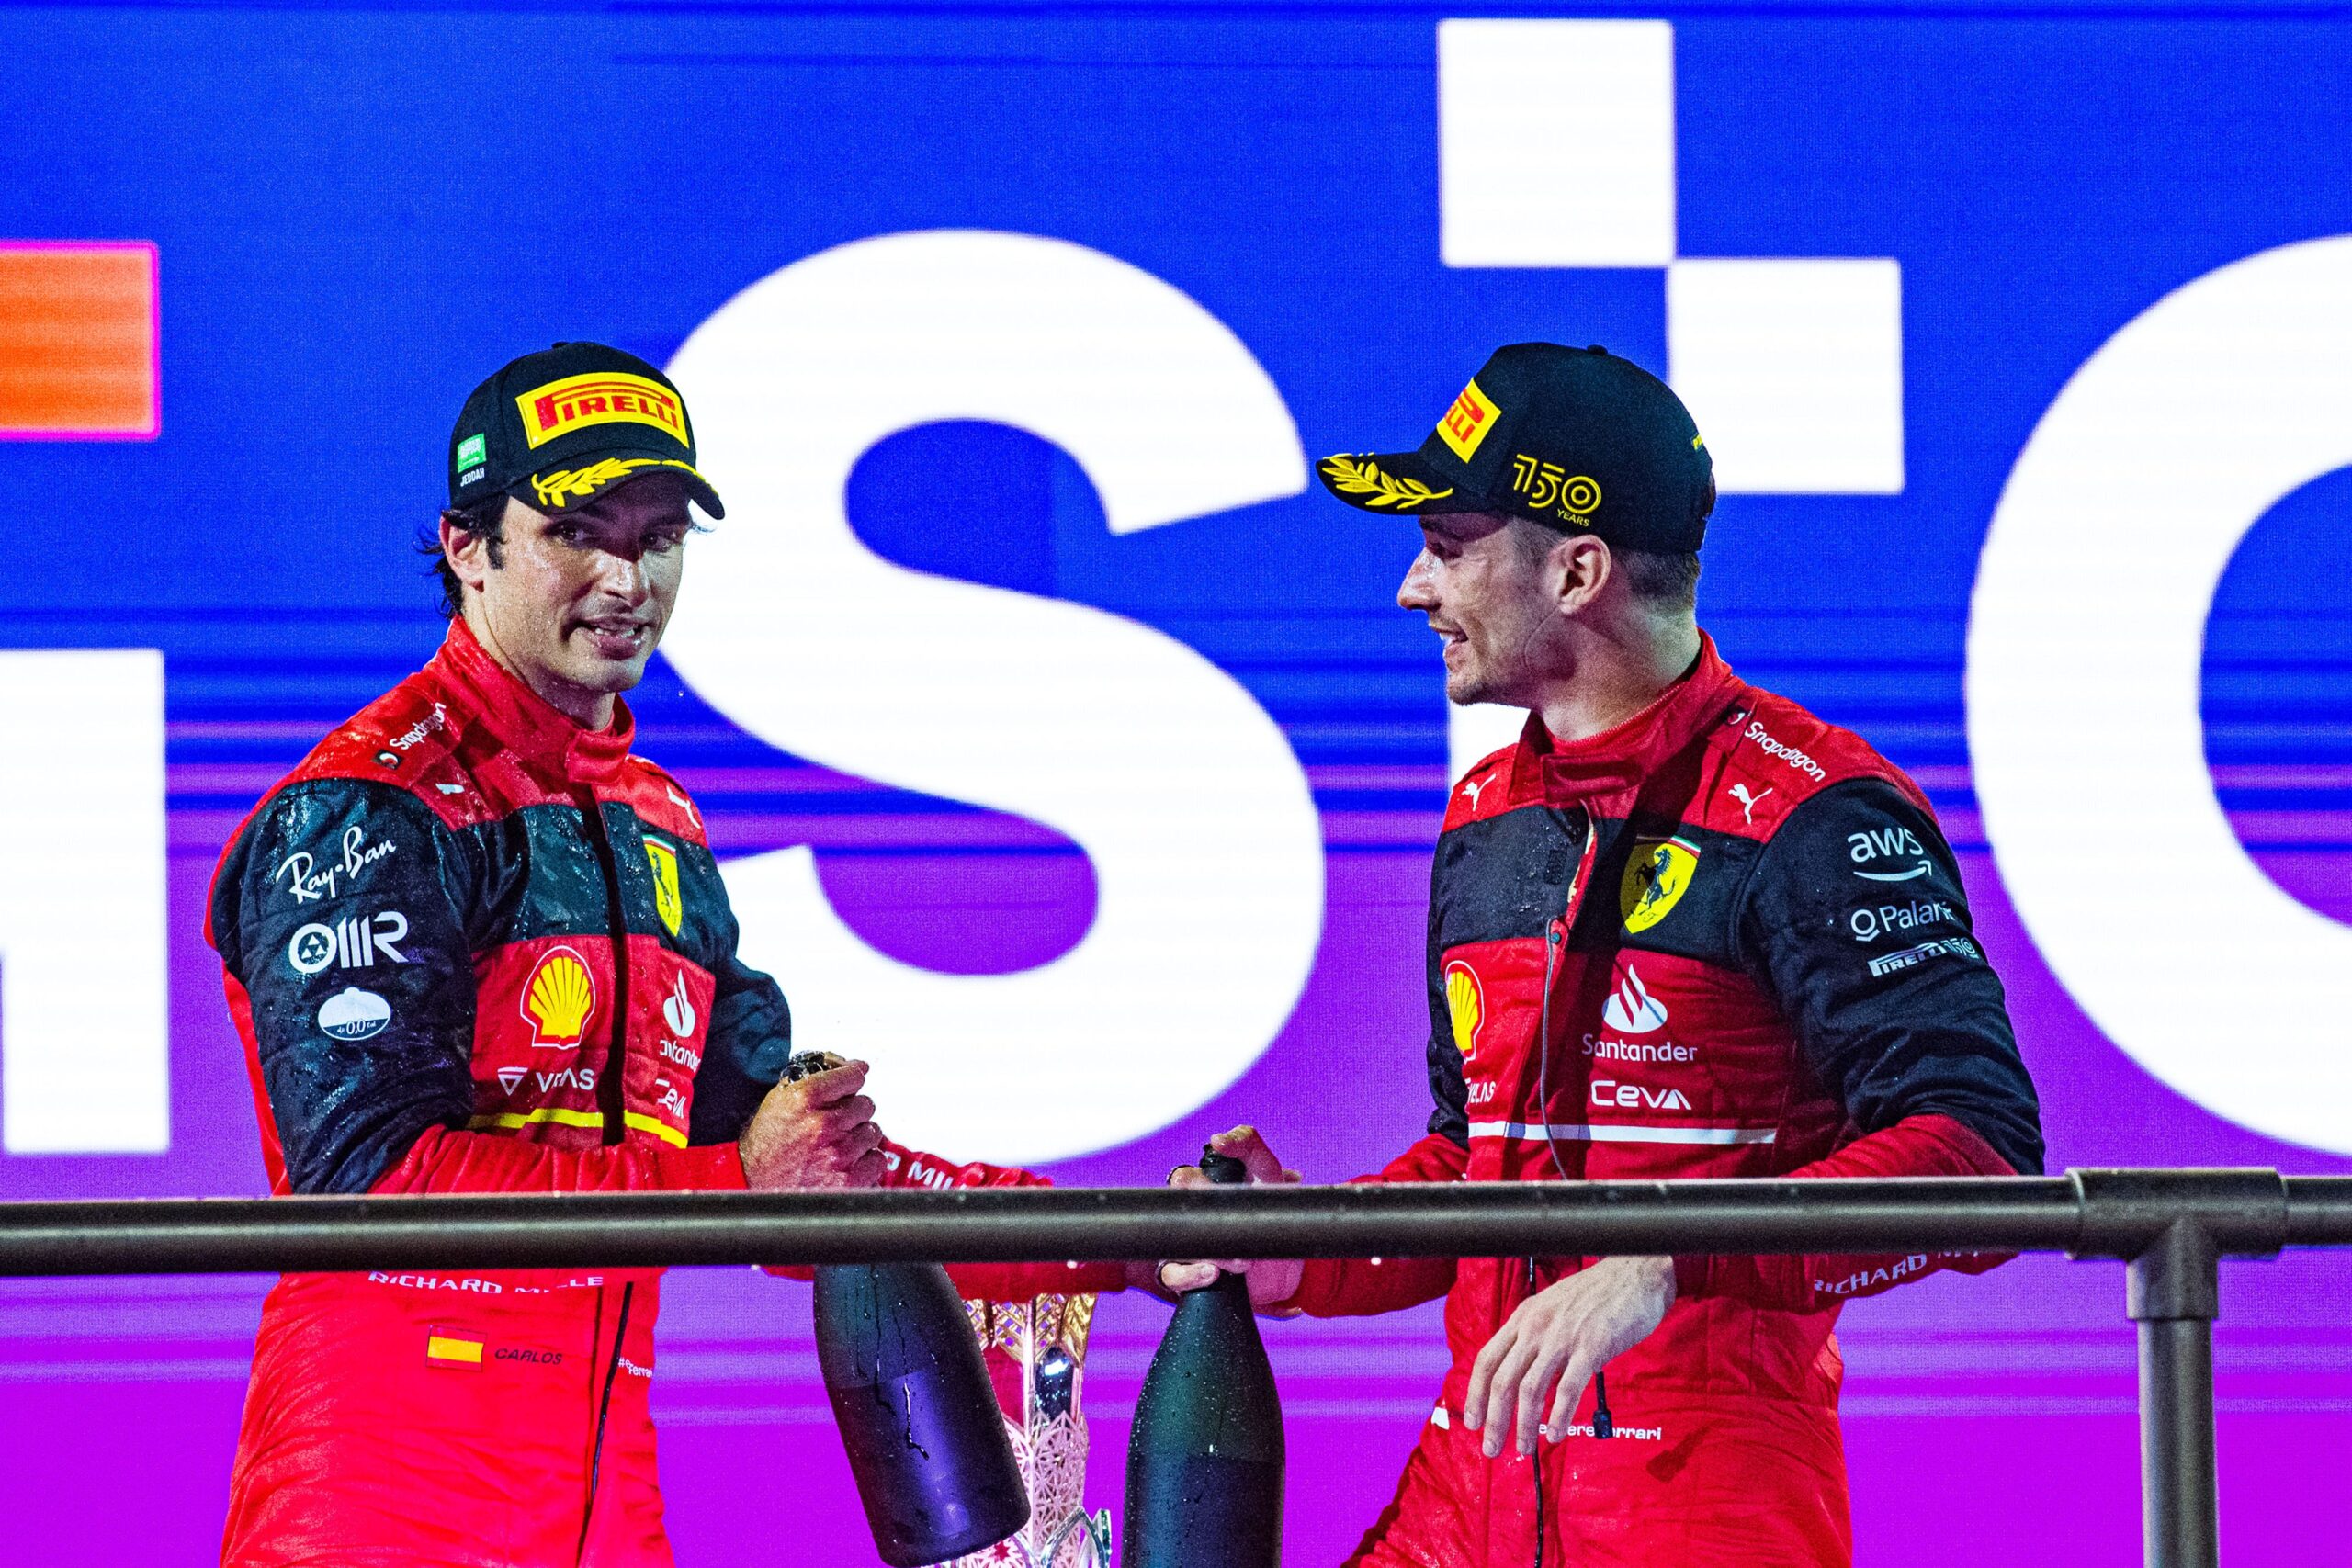 Ferrari drivers on podium for the second consecutive race